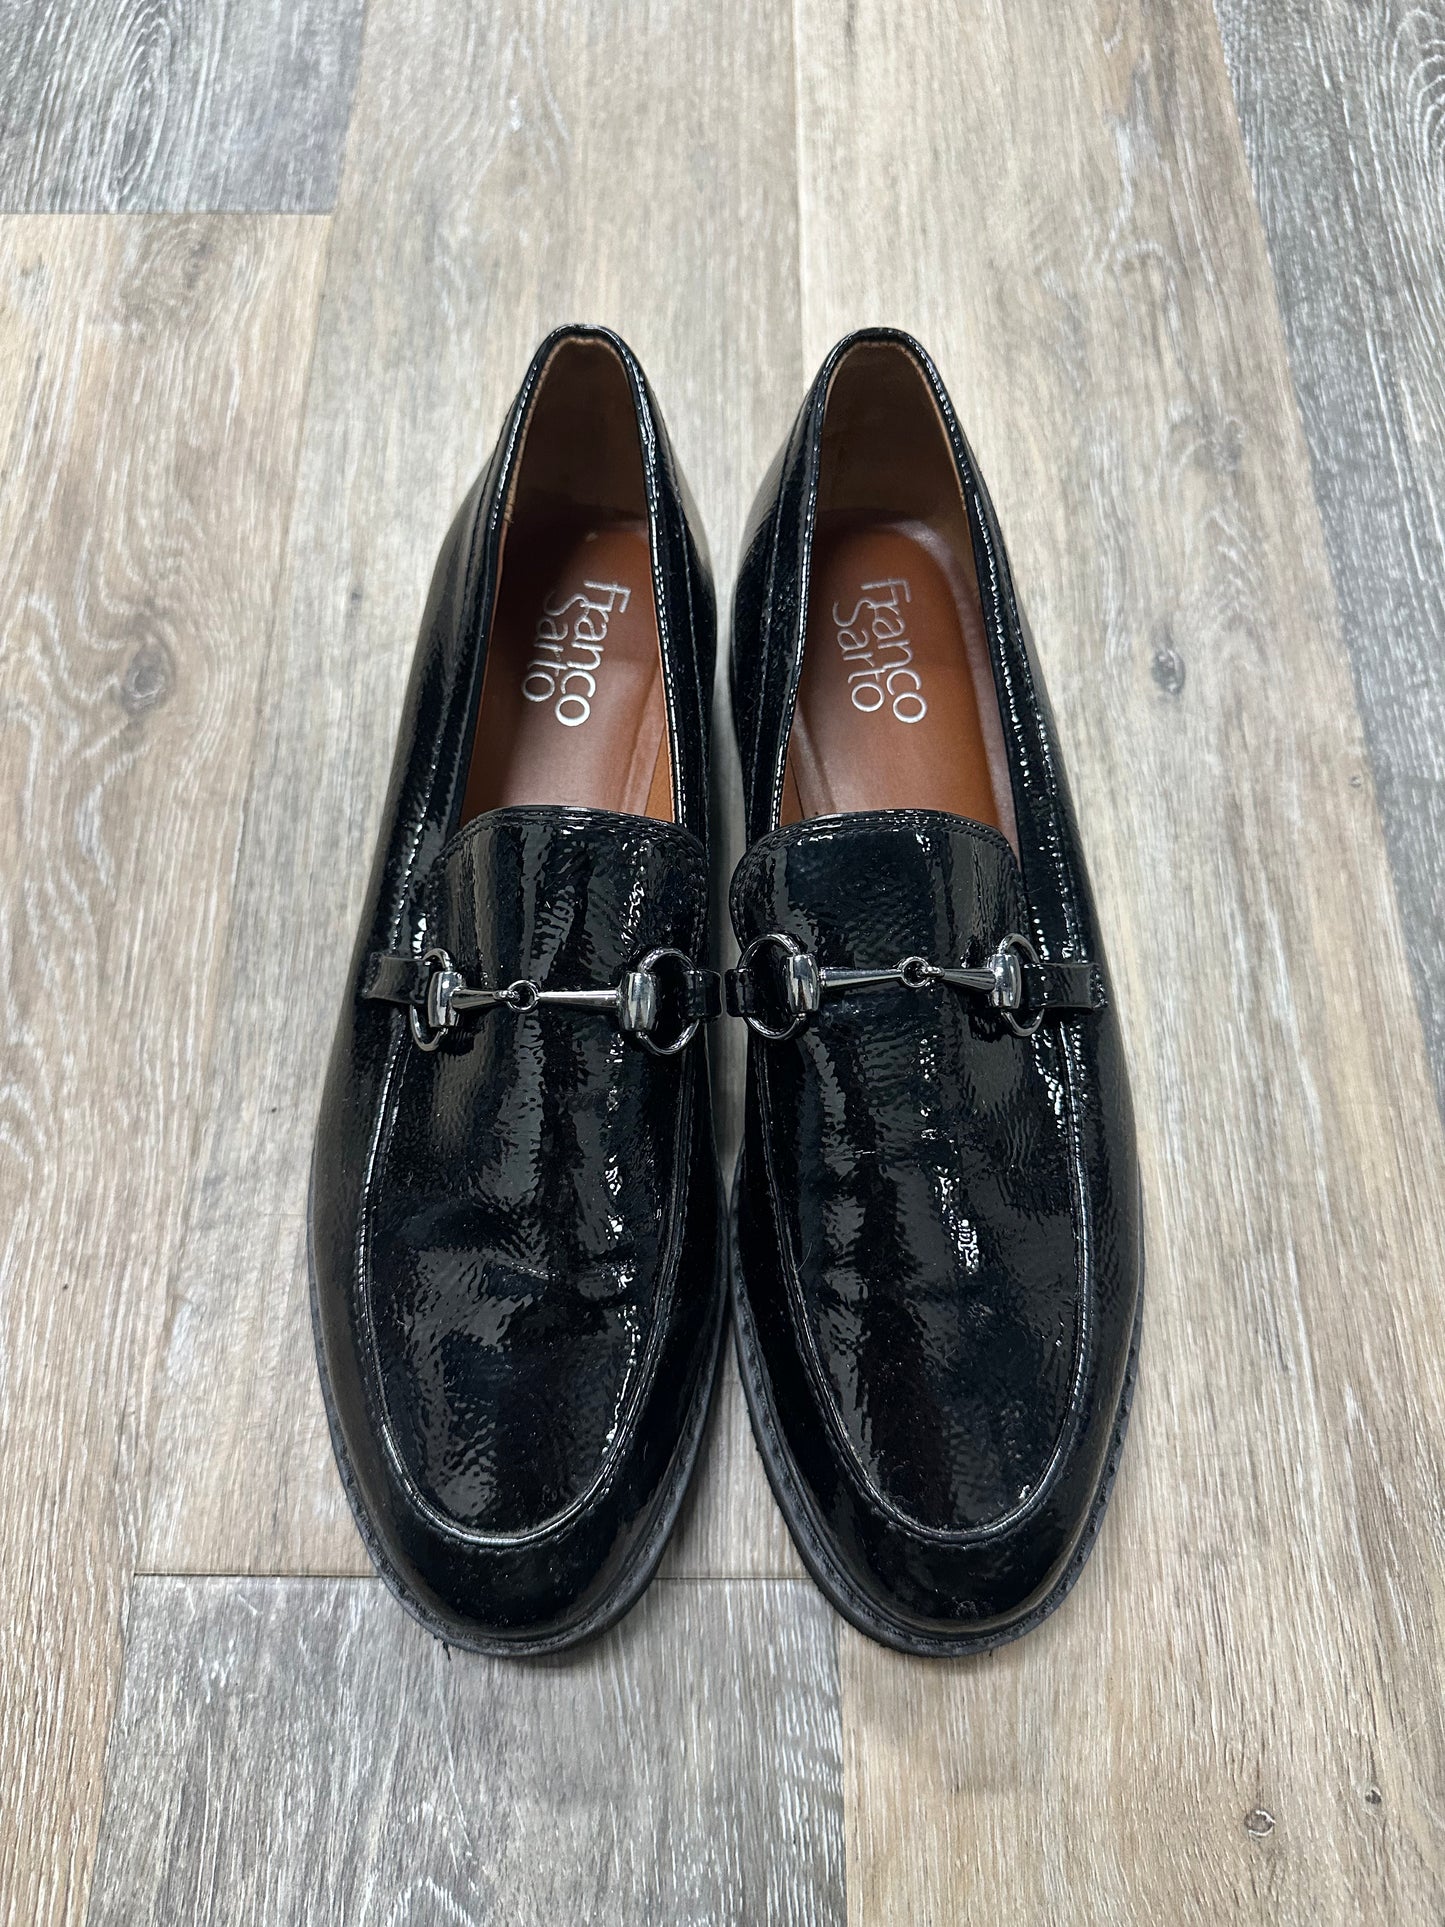 Shoes Flats Oxfords & Loafers By Franco Sarto  Size: 9.5